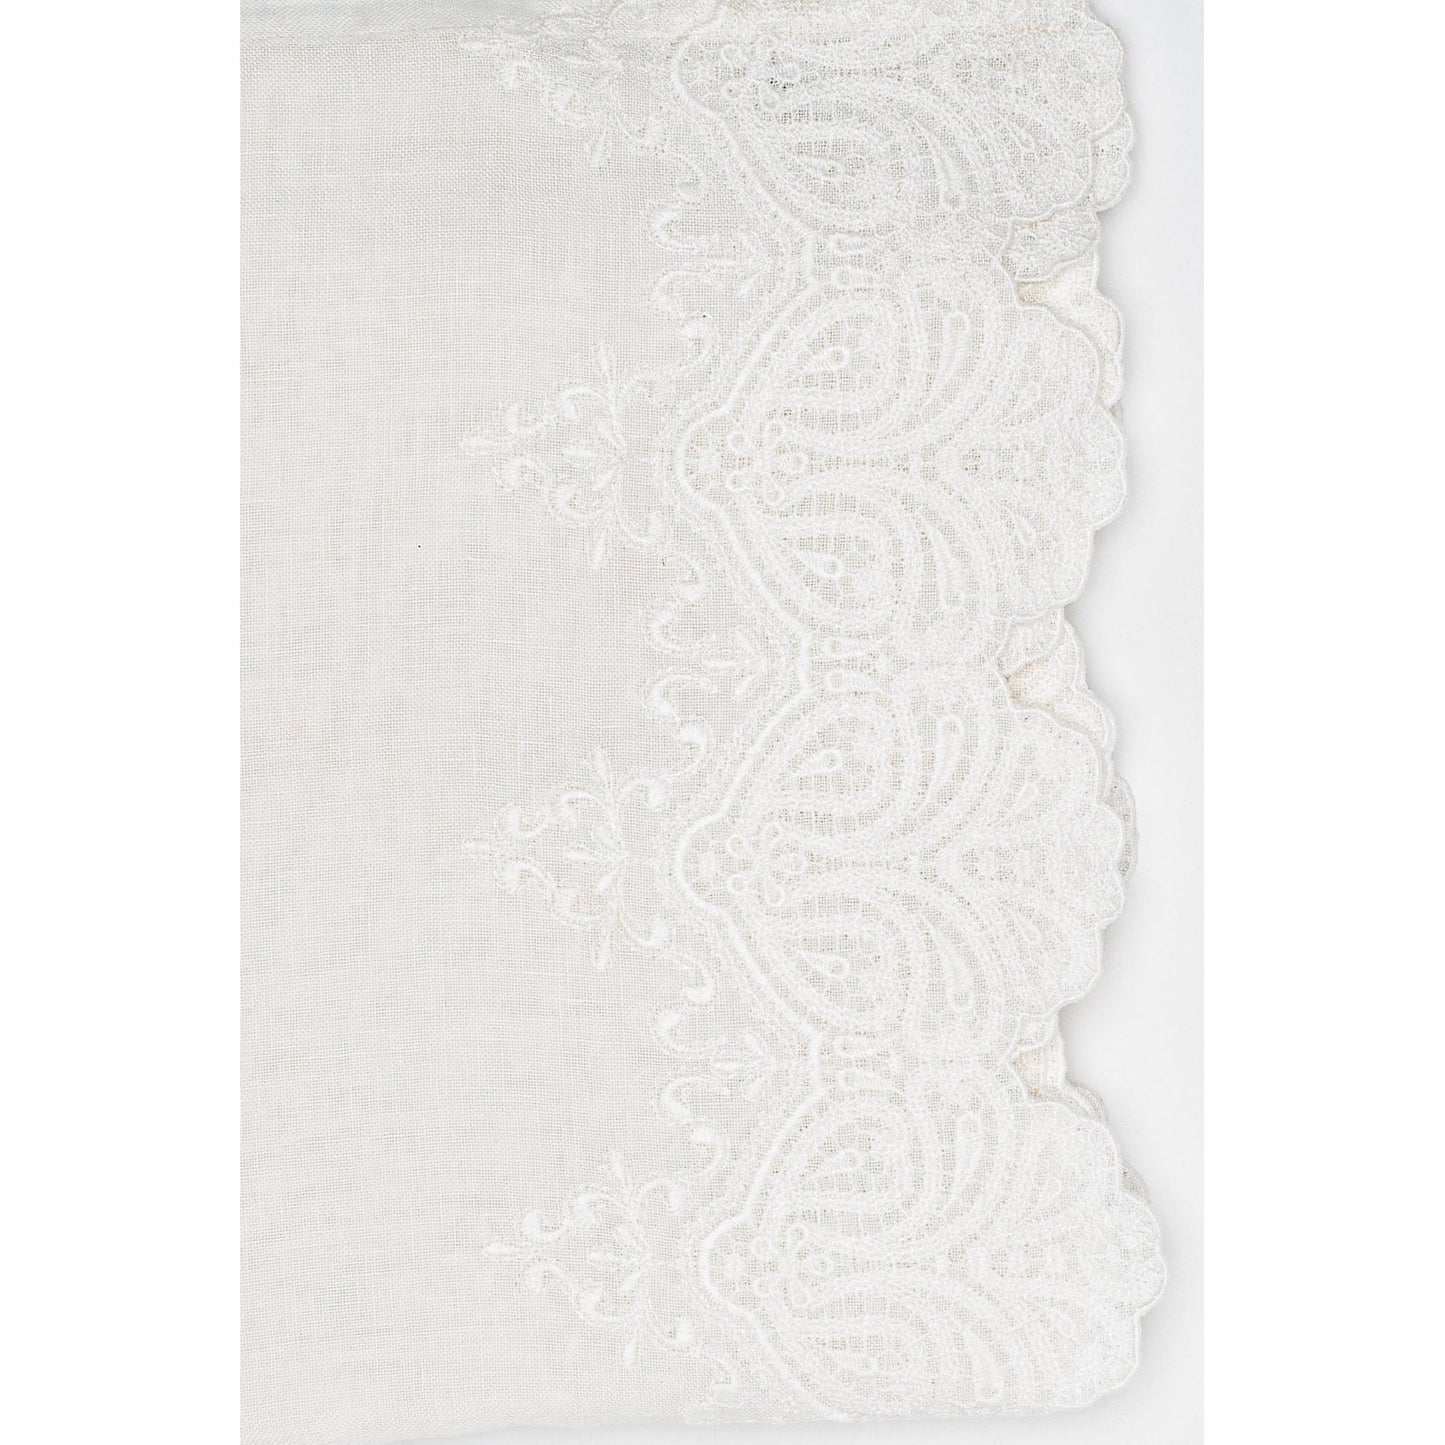 Julia tablecloth is made of 100% linen with a large embroidery in the middle and 2 large embroidered scalloped borders along the length. The simplicity of the linen and the luxury of the embroidery give this tablecloth its well-deserved stunning looks!